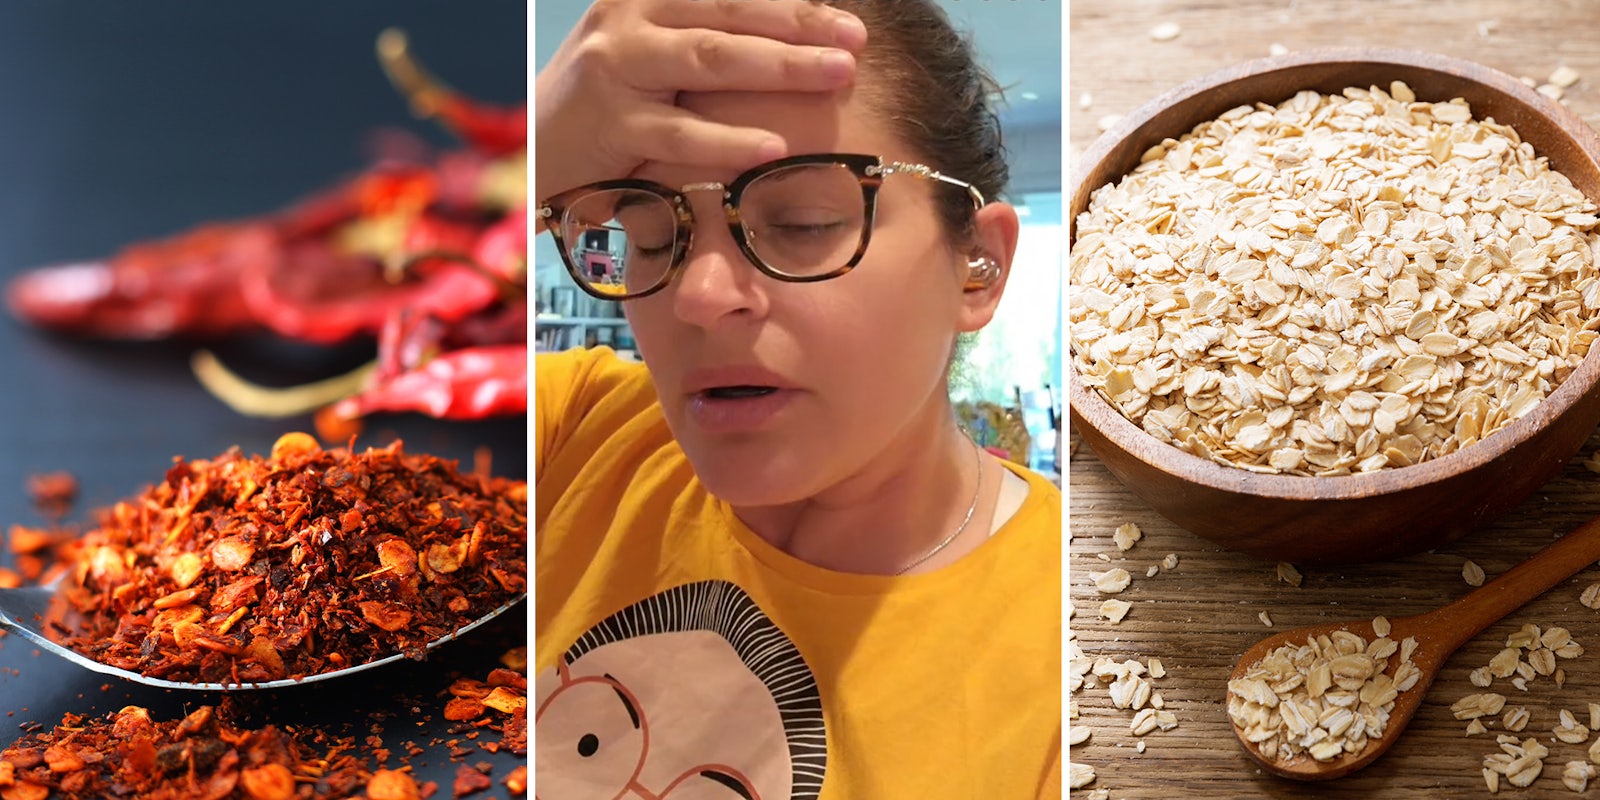 Woman finds something unusual in her red pepper flakes, oatmeal